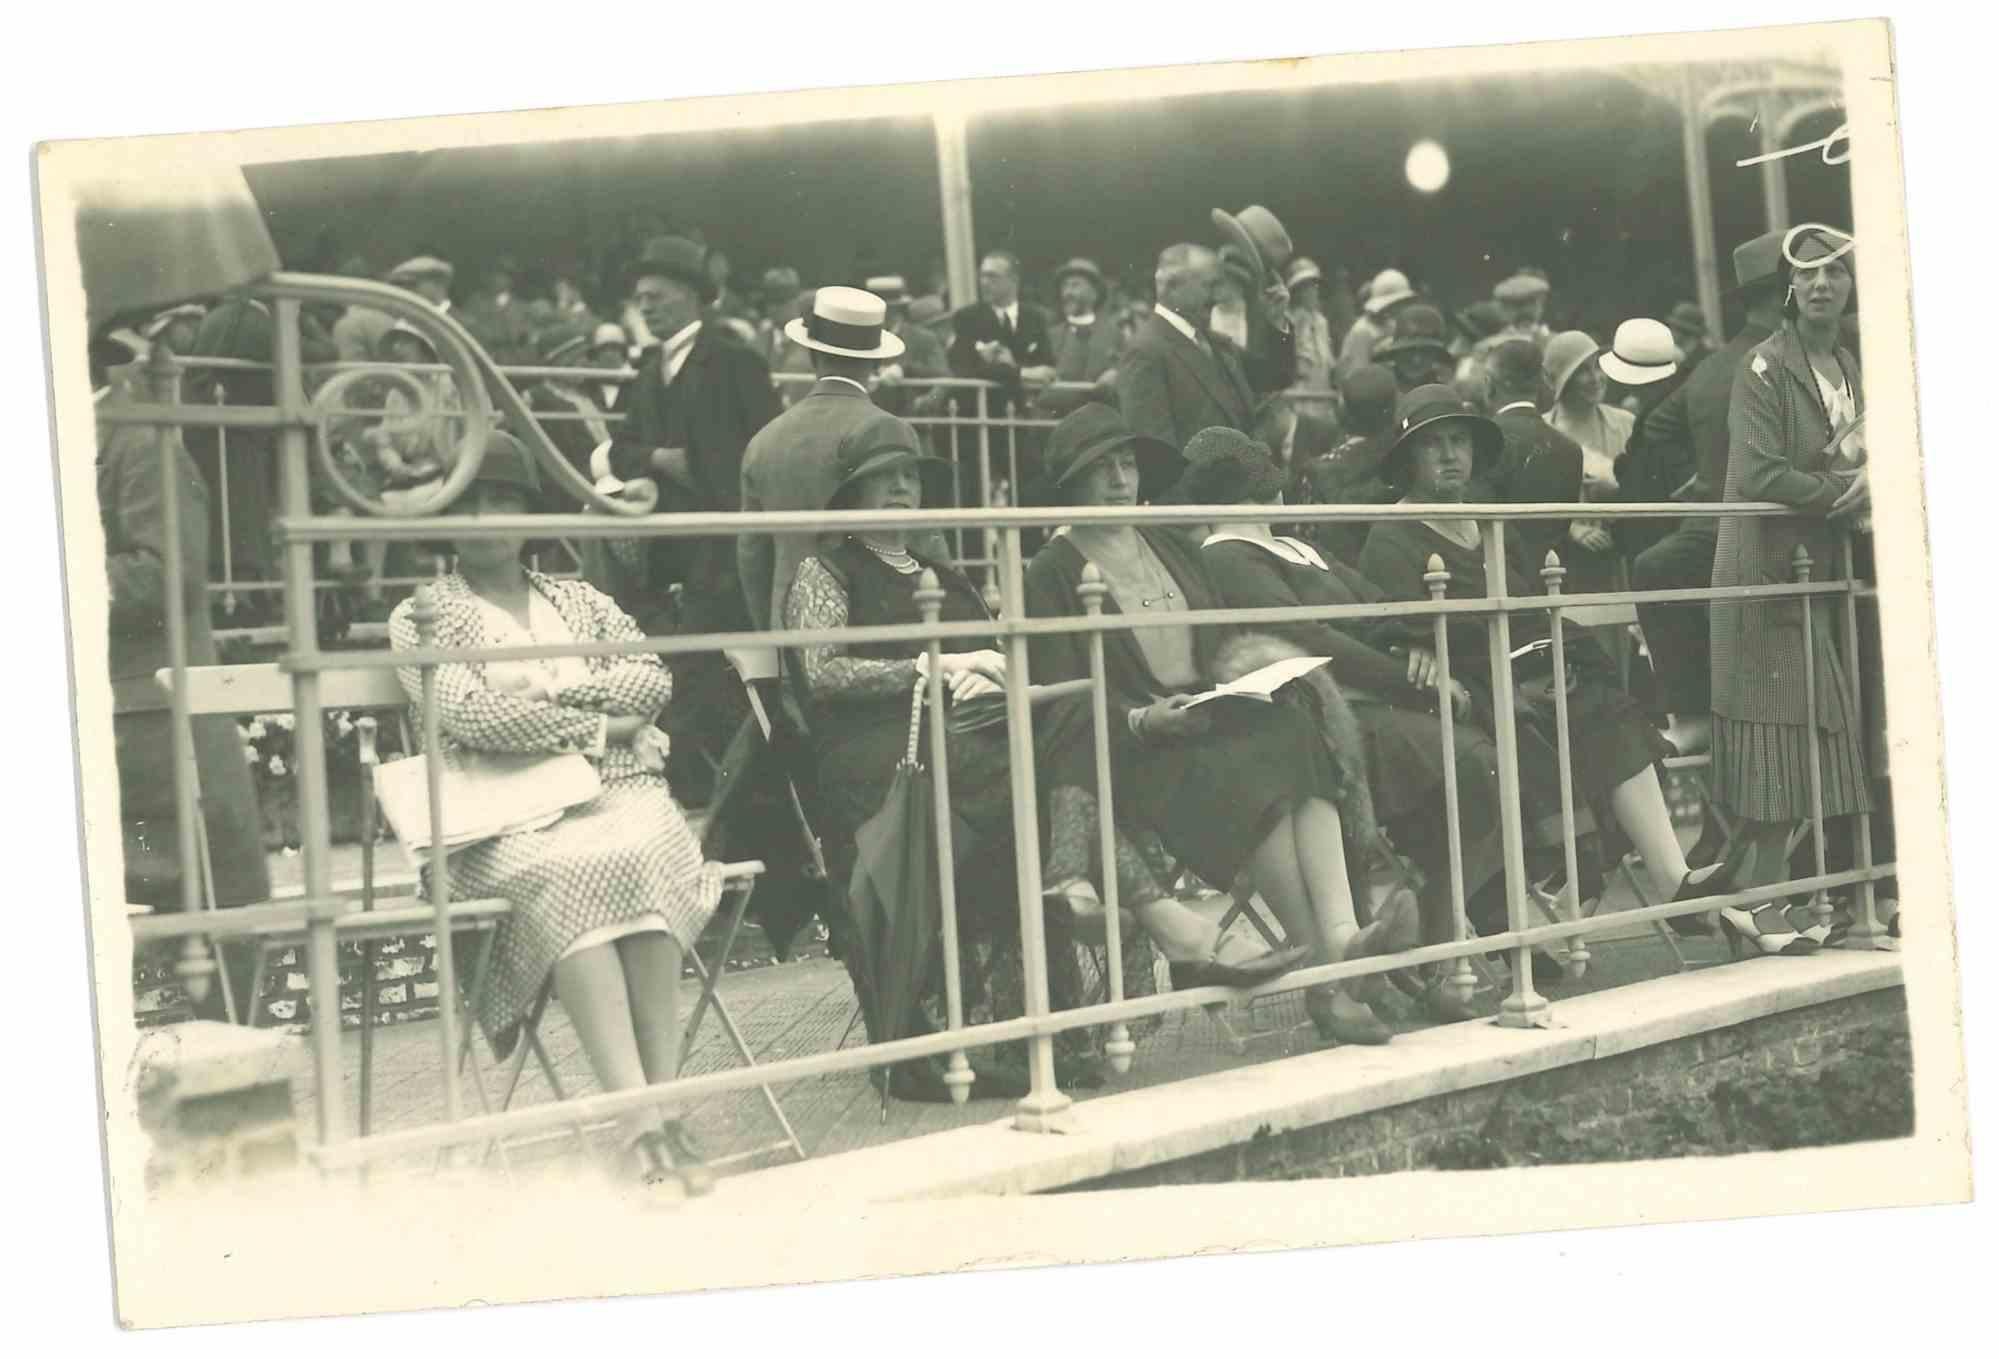 Unknown Landscape Photograph - At the Horse Race  - The Old Days - Early 20th Century